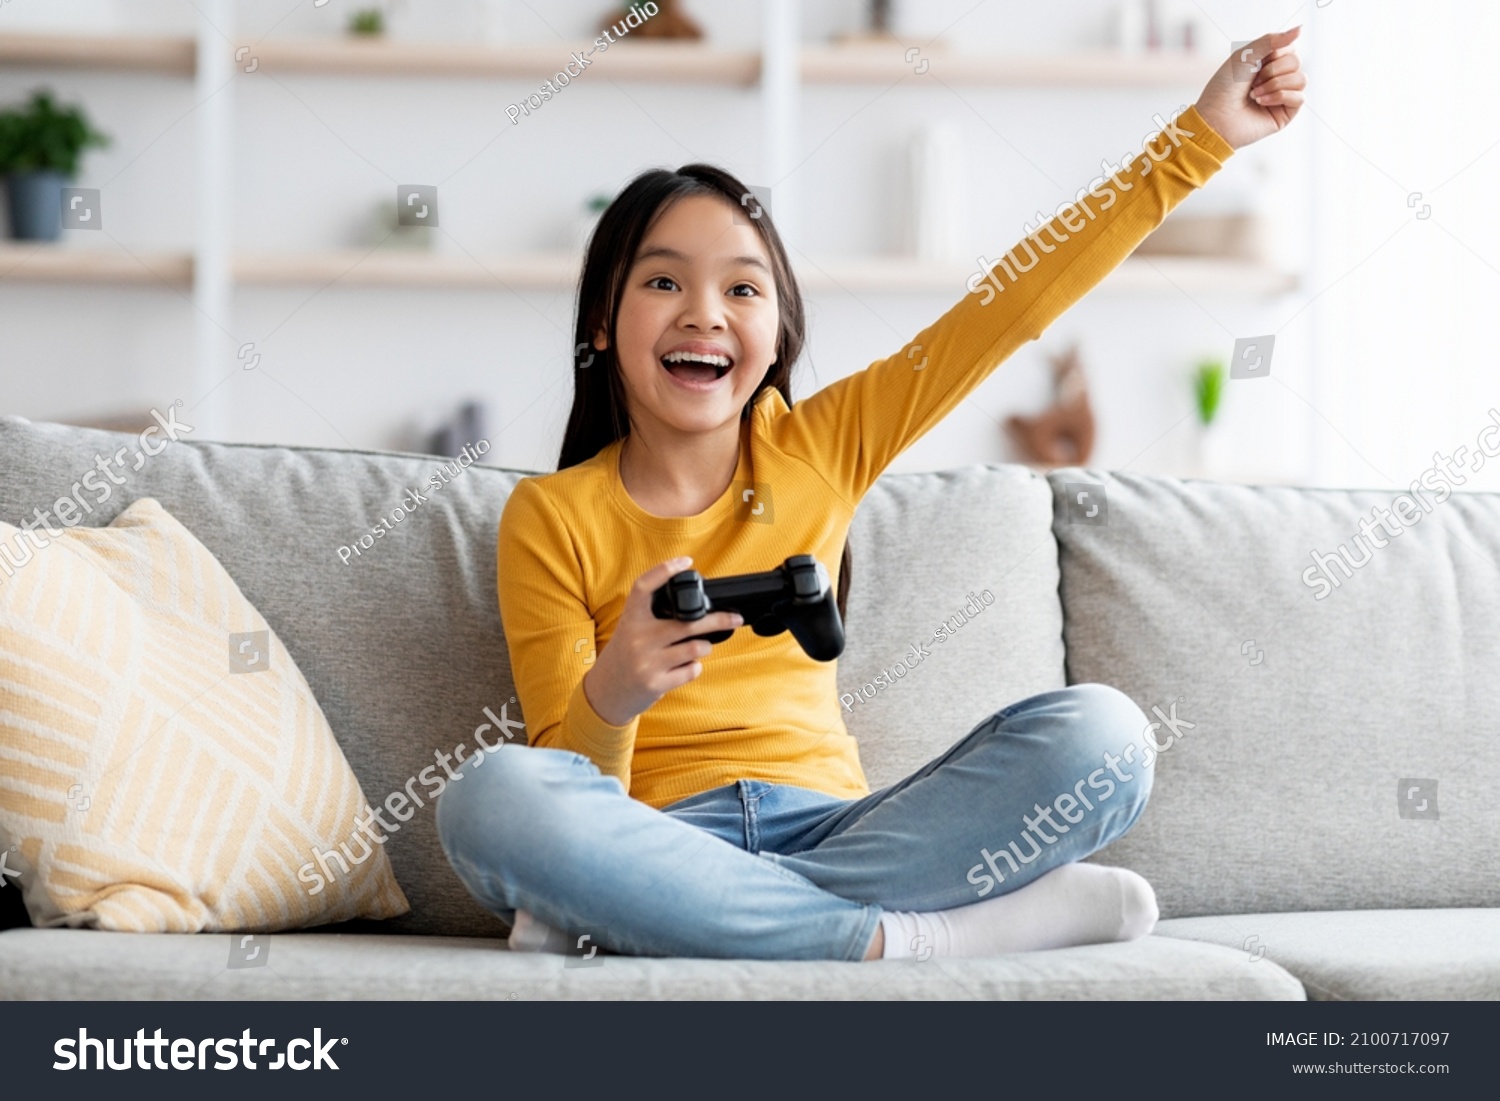 Happy cute asian girl schooler sitting on couch in living room, holding joystick, playing handheld video game and gesturing, enjoying weekend at home, kids entertaining concept, copy space #2100717097